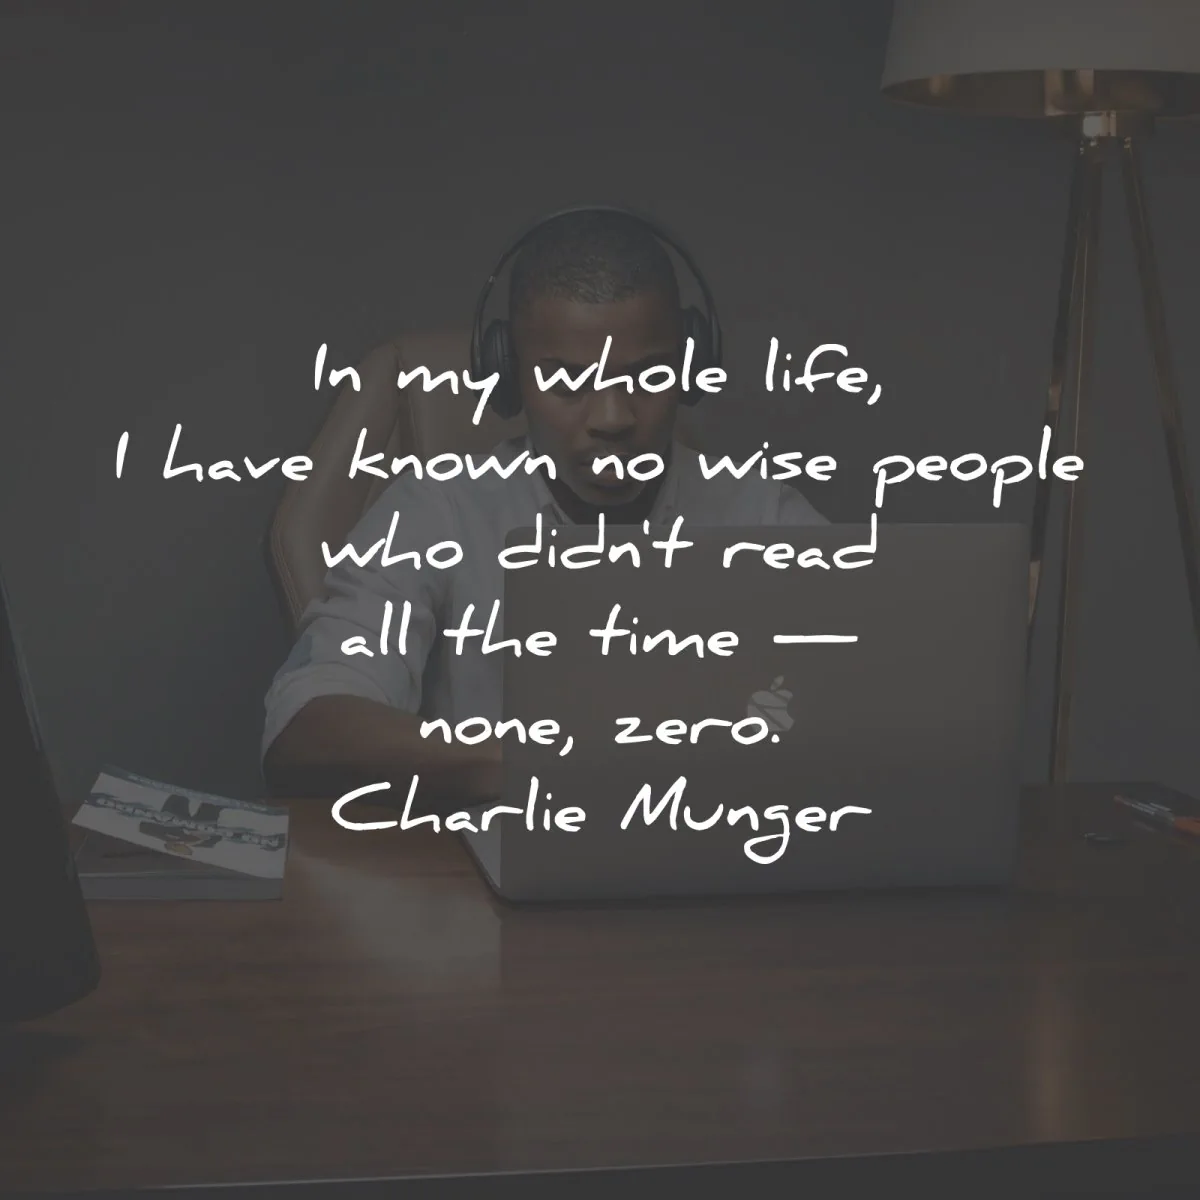 charlie munger quotes whole life known wise people read wisdom